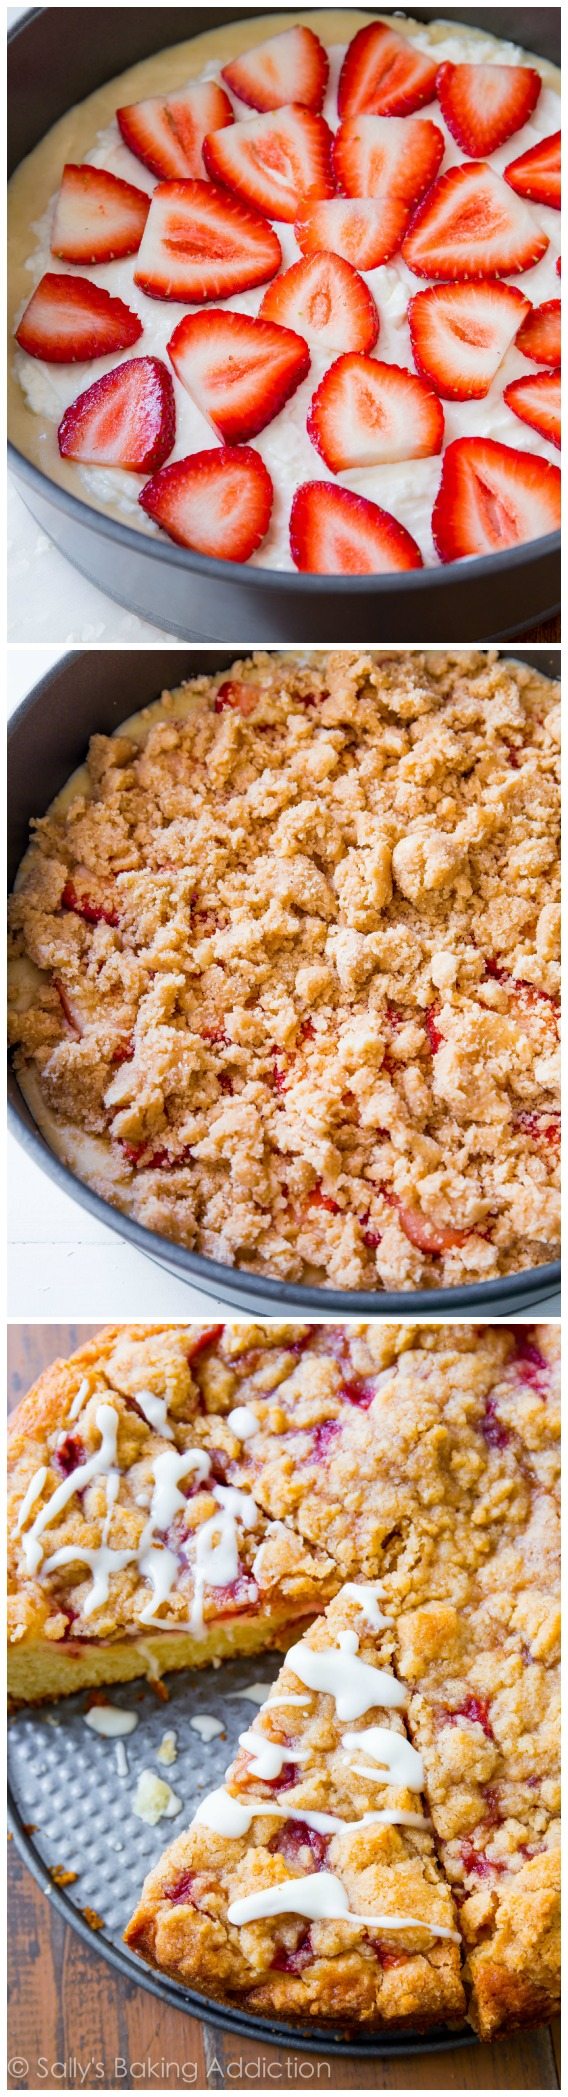 3 images showing how to make glazed strawberry crumb cake